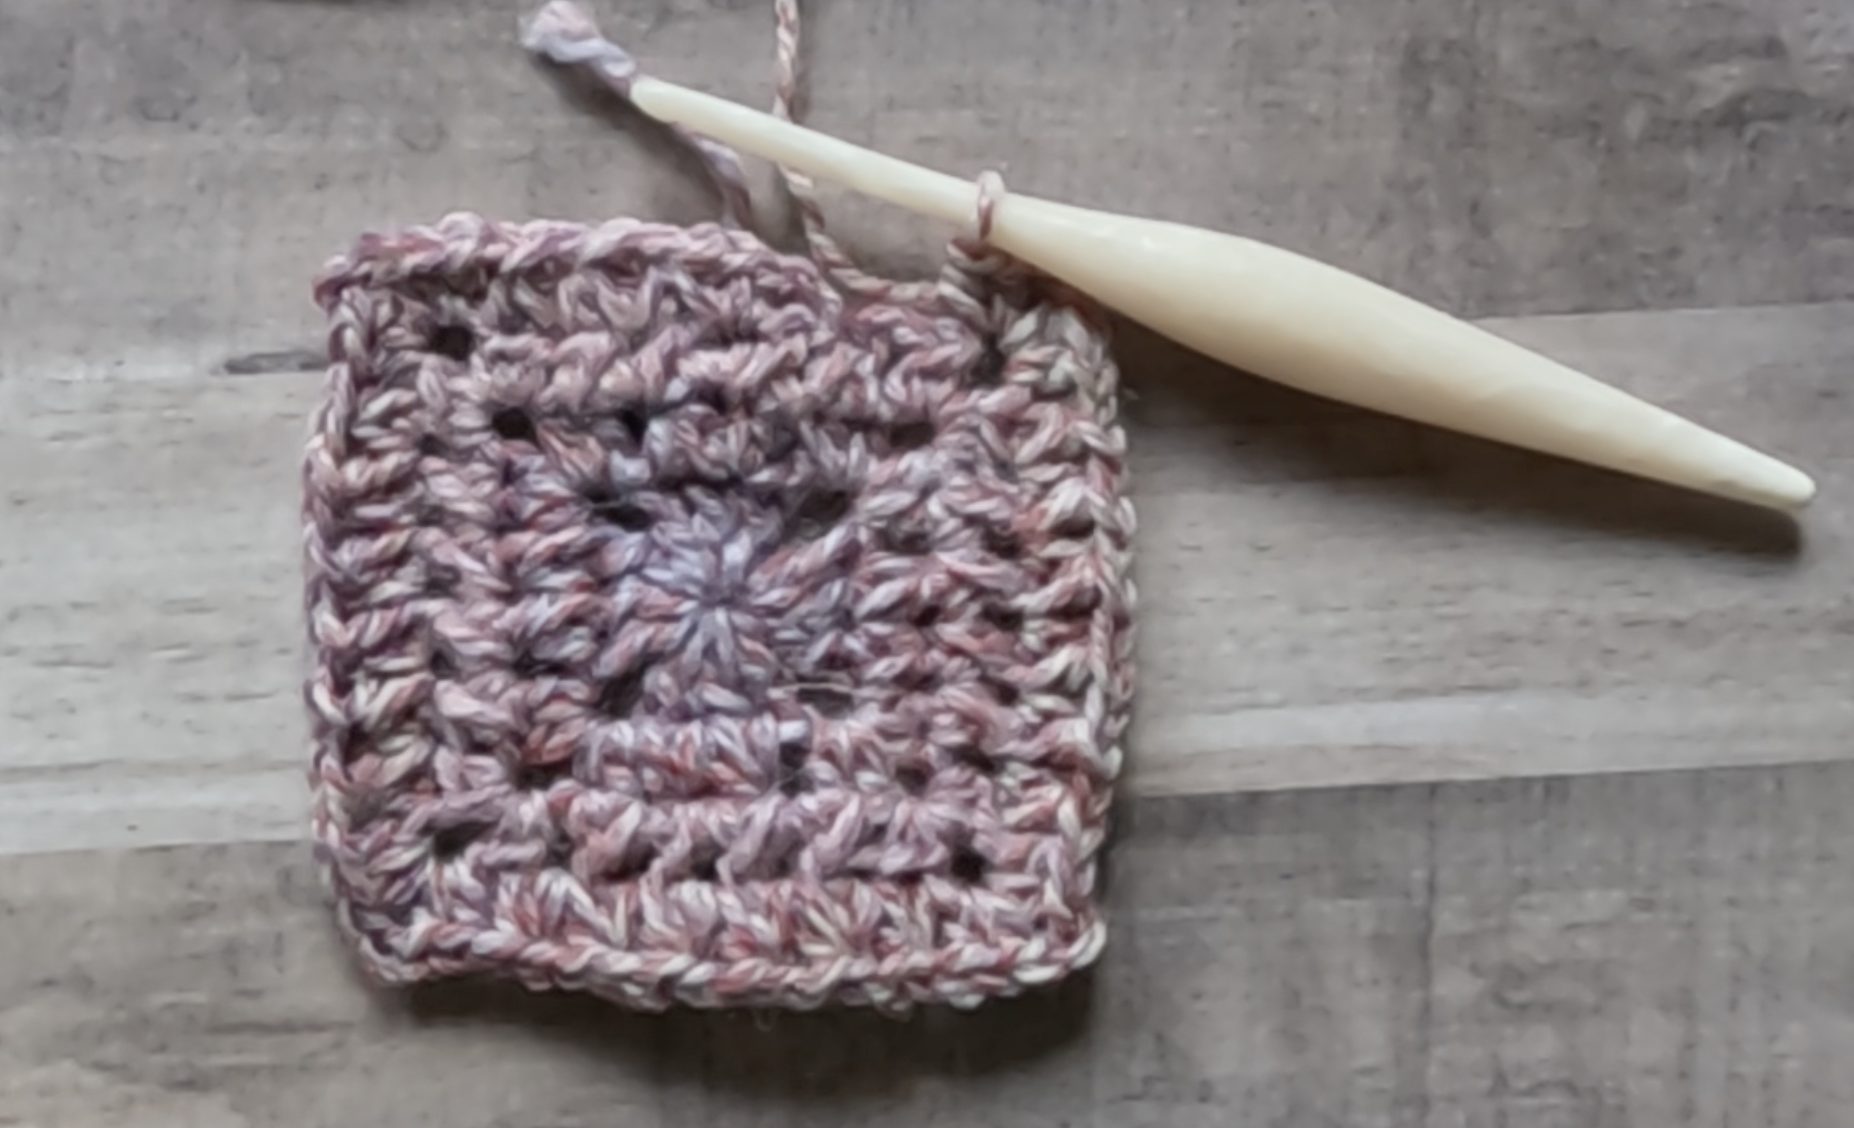 An image of a crochet granny square being made with a purple color yarn and cream colored crochet hook. The crochet square shows 3 completed rounds and the 4th round is almost complete.